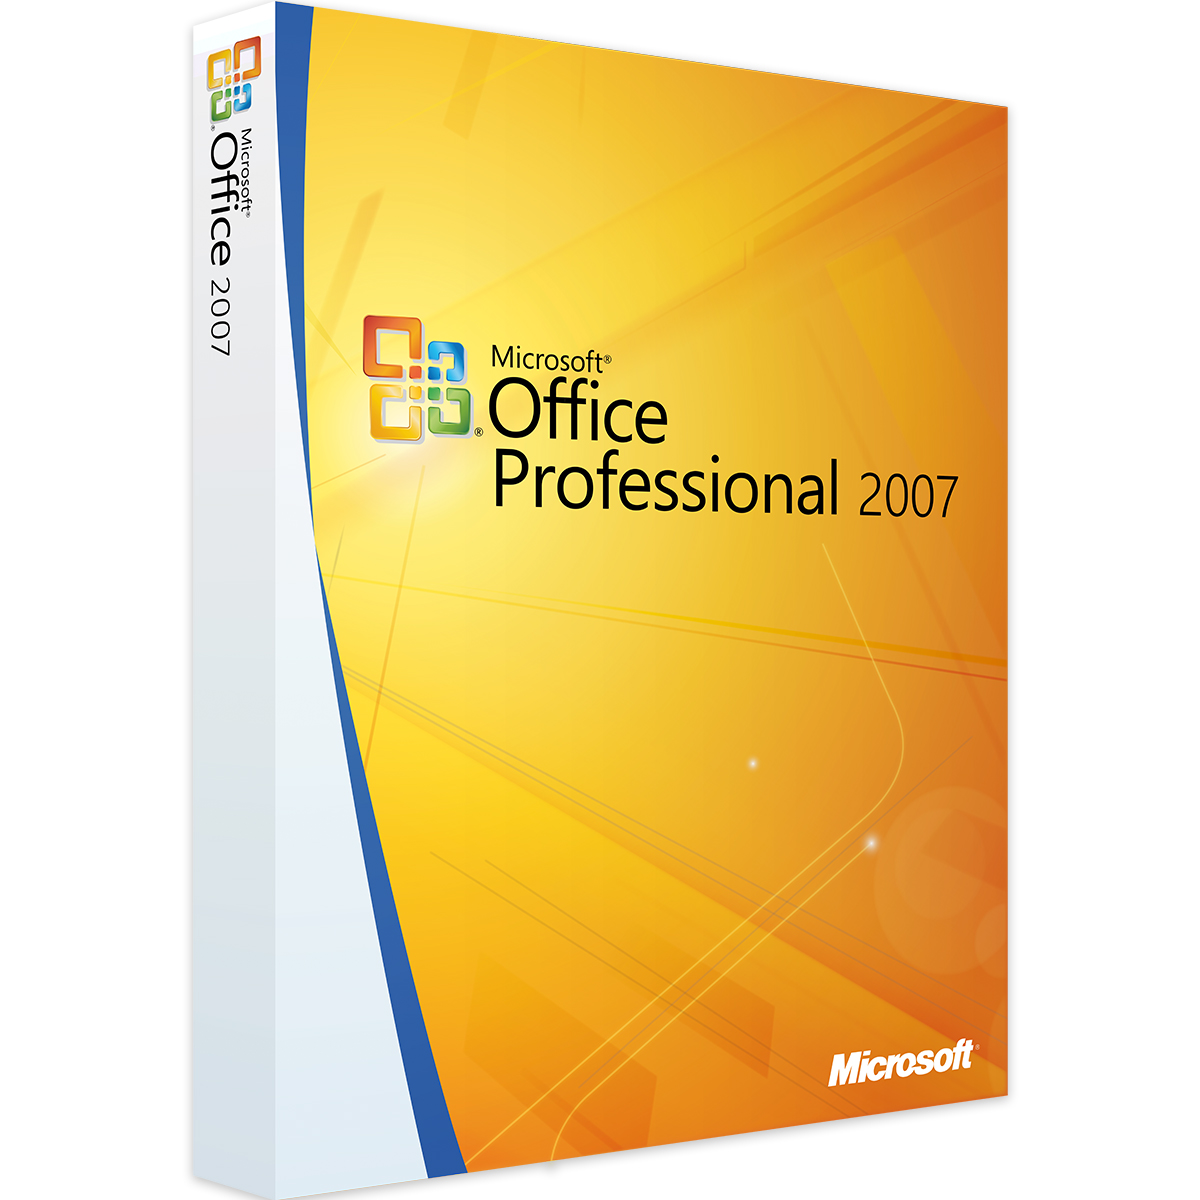 Buy Office 2007 Professional - Get Productive Today